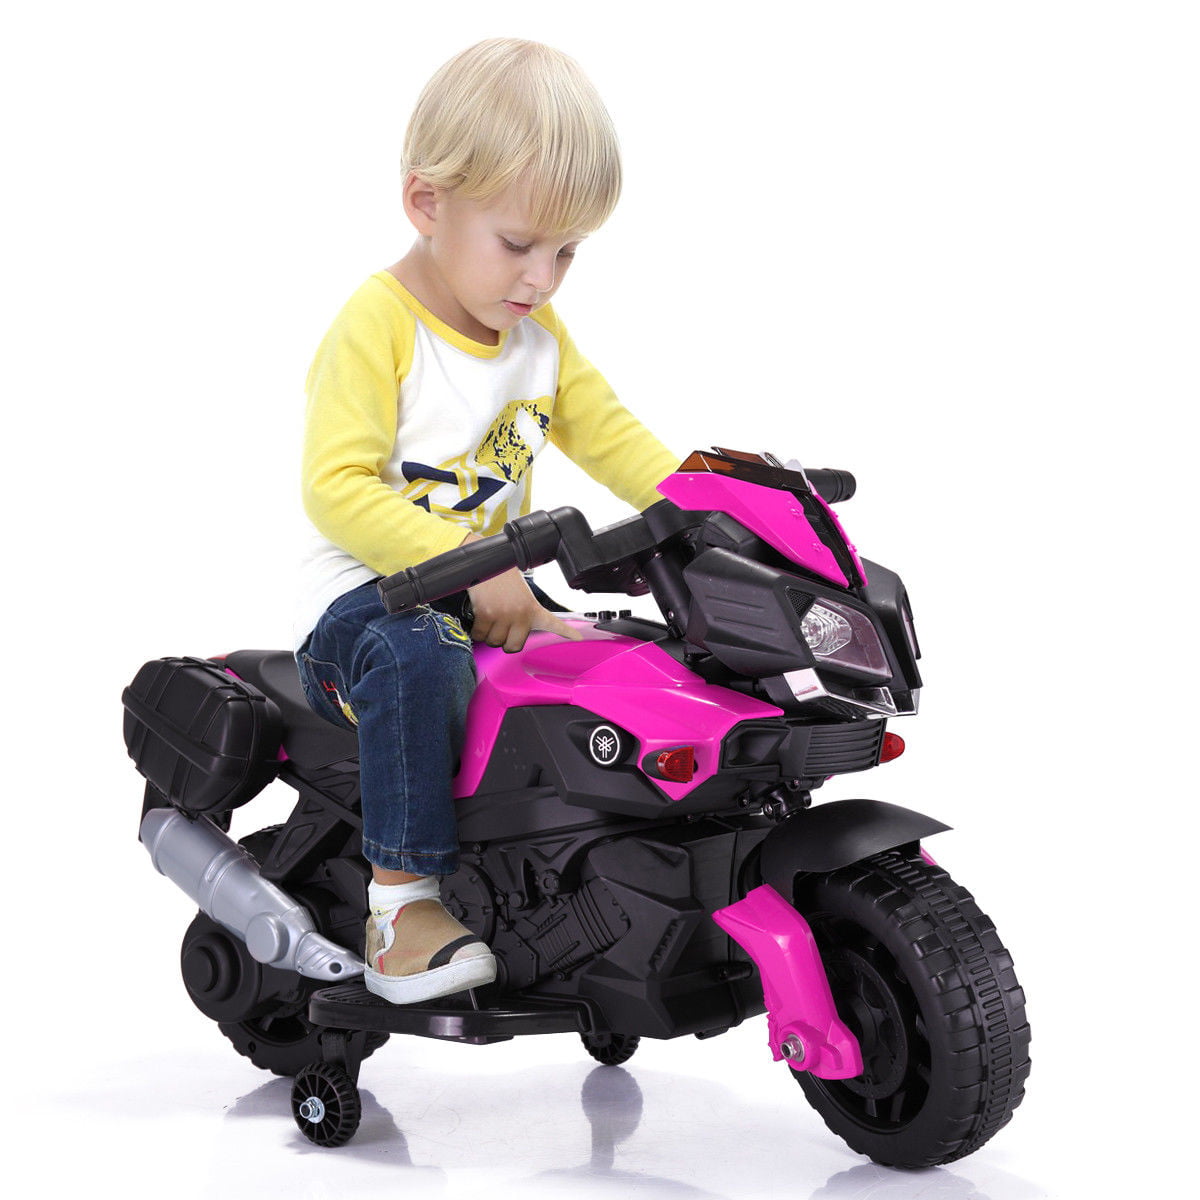 Veryke Kids Electric Battery-Powered Ride-On Motorcycle Dirt Bike Toy for Kids, Kids Ride On Motorcycle, 4 Wheeler Gifts Pink Motorcycle for Children Child Boys